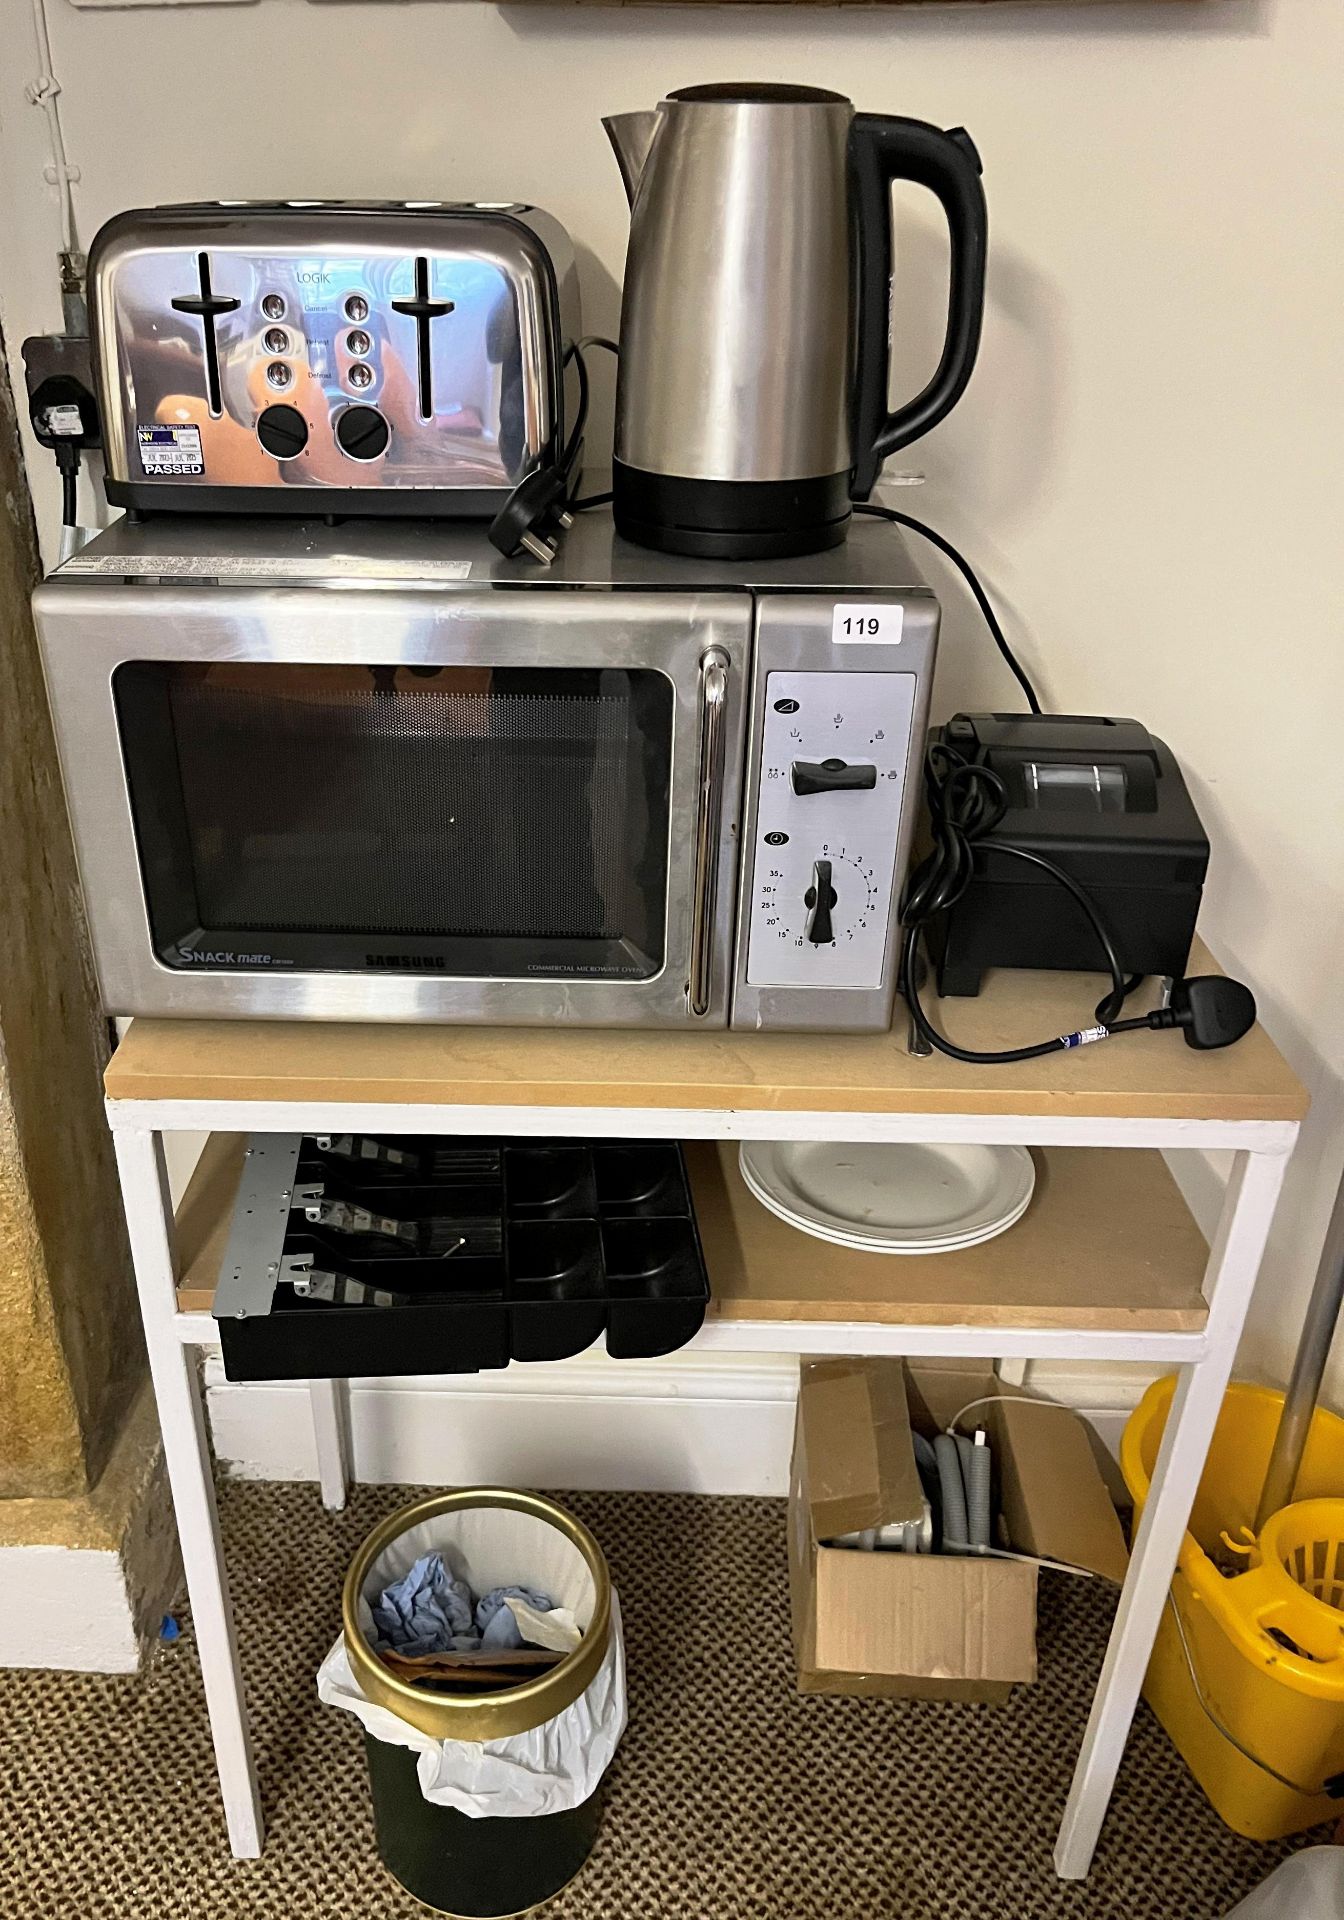 MICROWAVE, TOASTER, KETTLE AND STAND ETC.